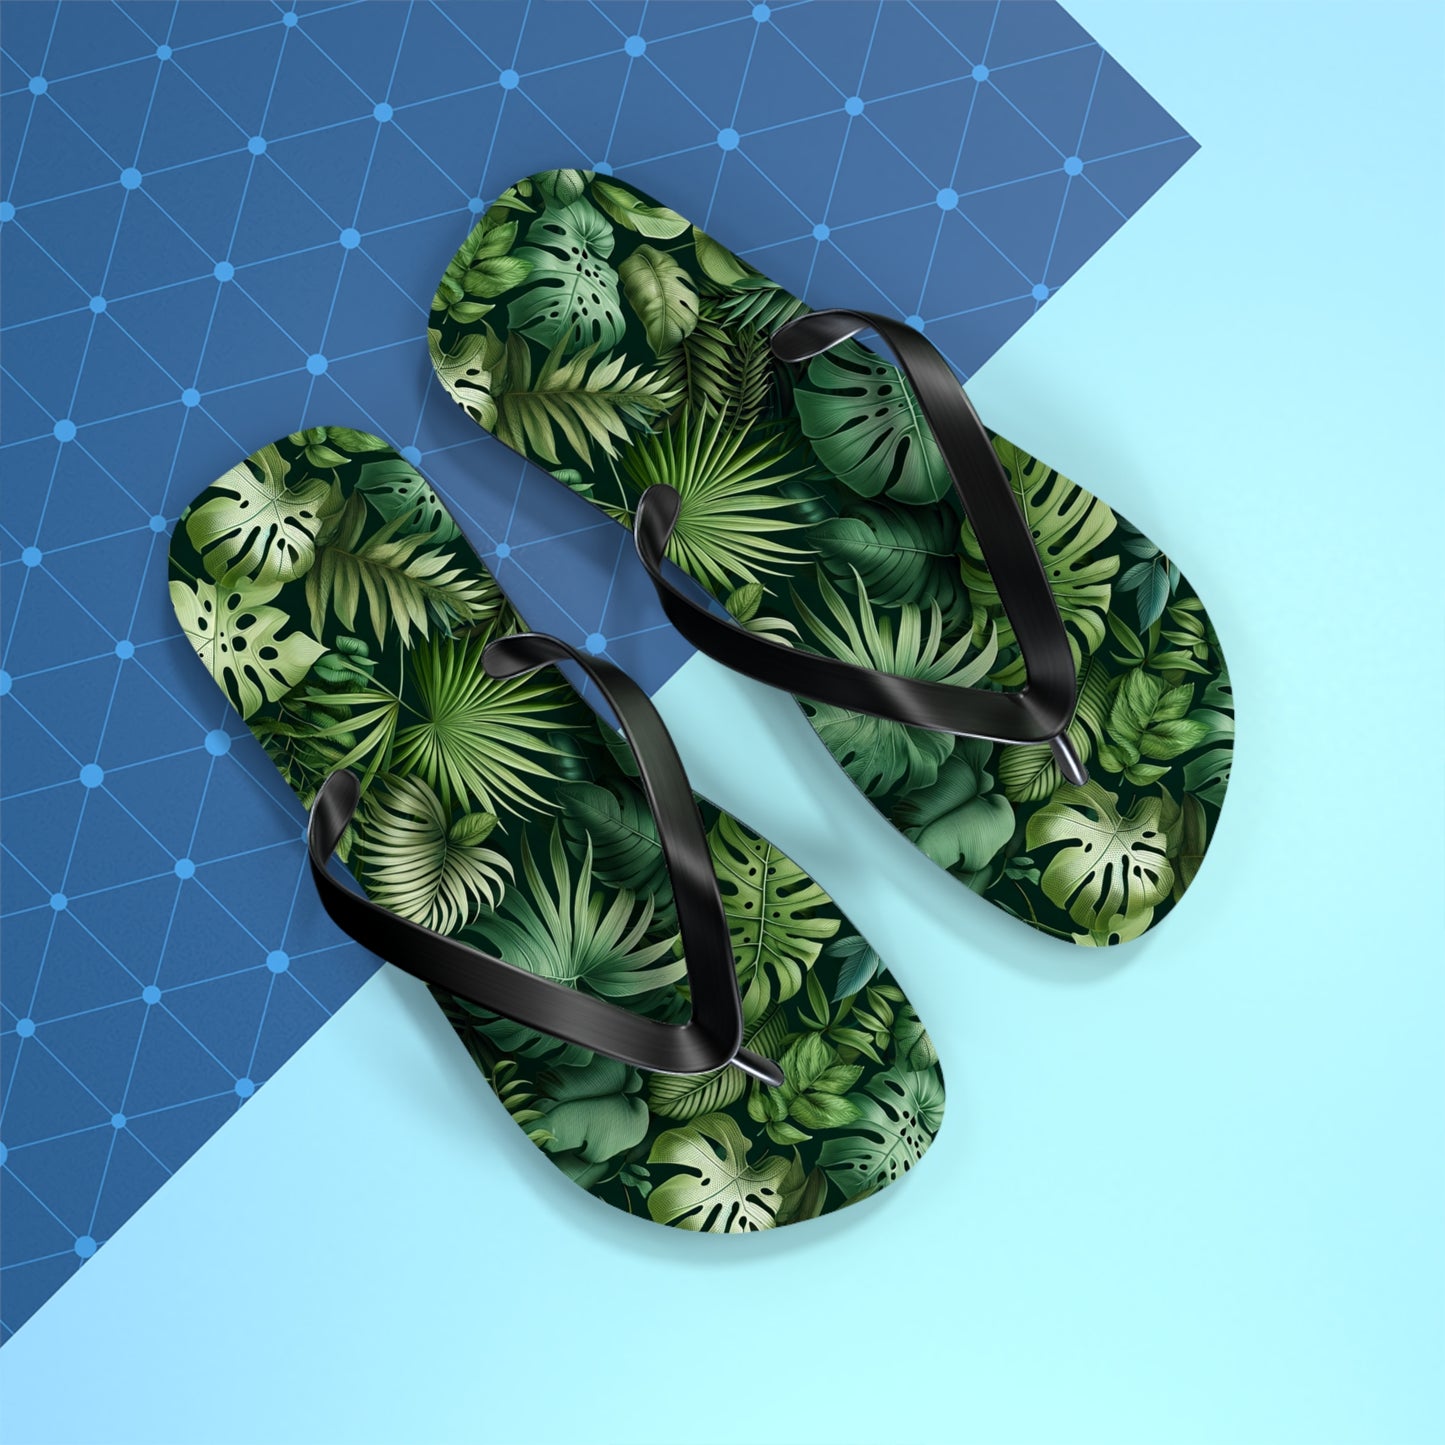 Tropical Jungle Foliage Flip Flops - Lush and Exotic Footwear